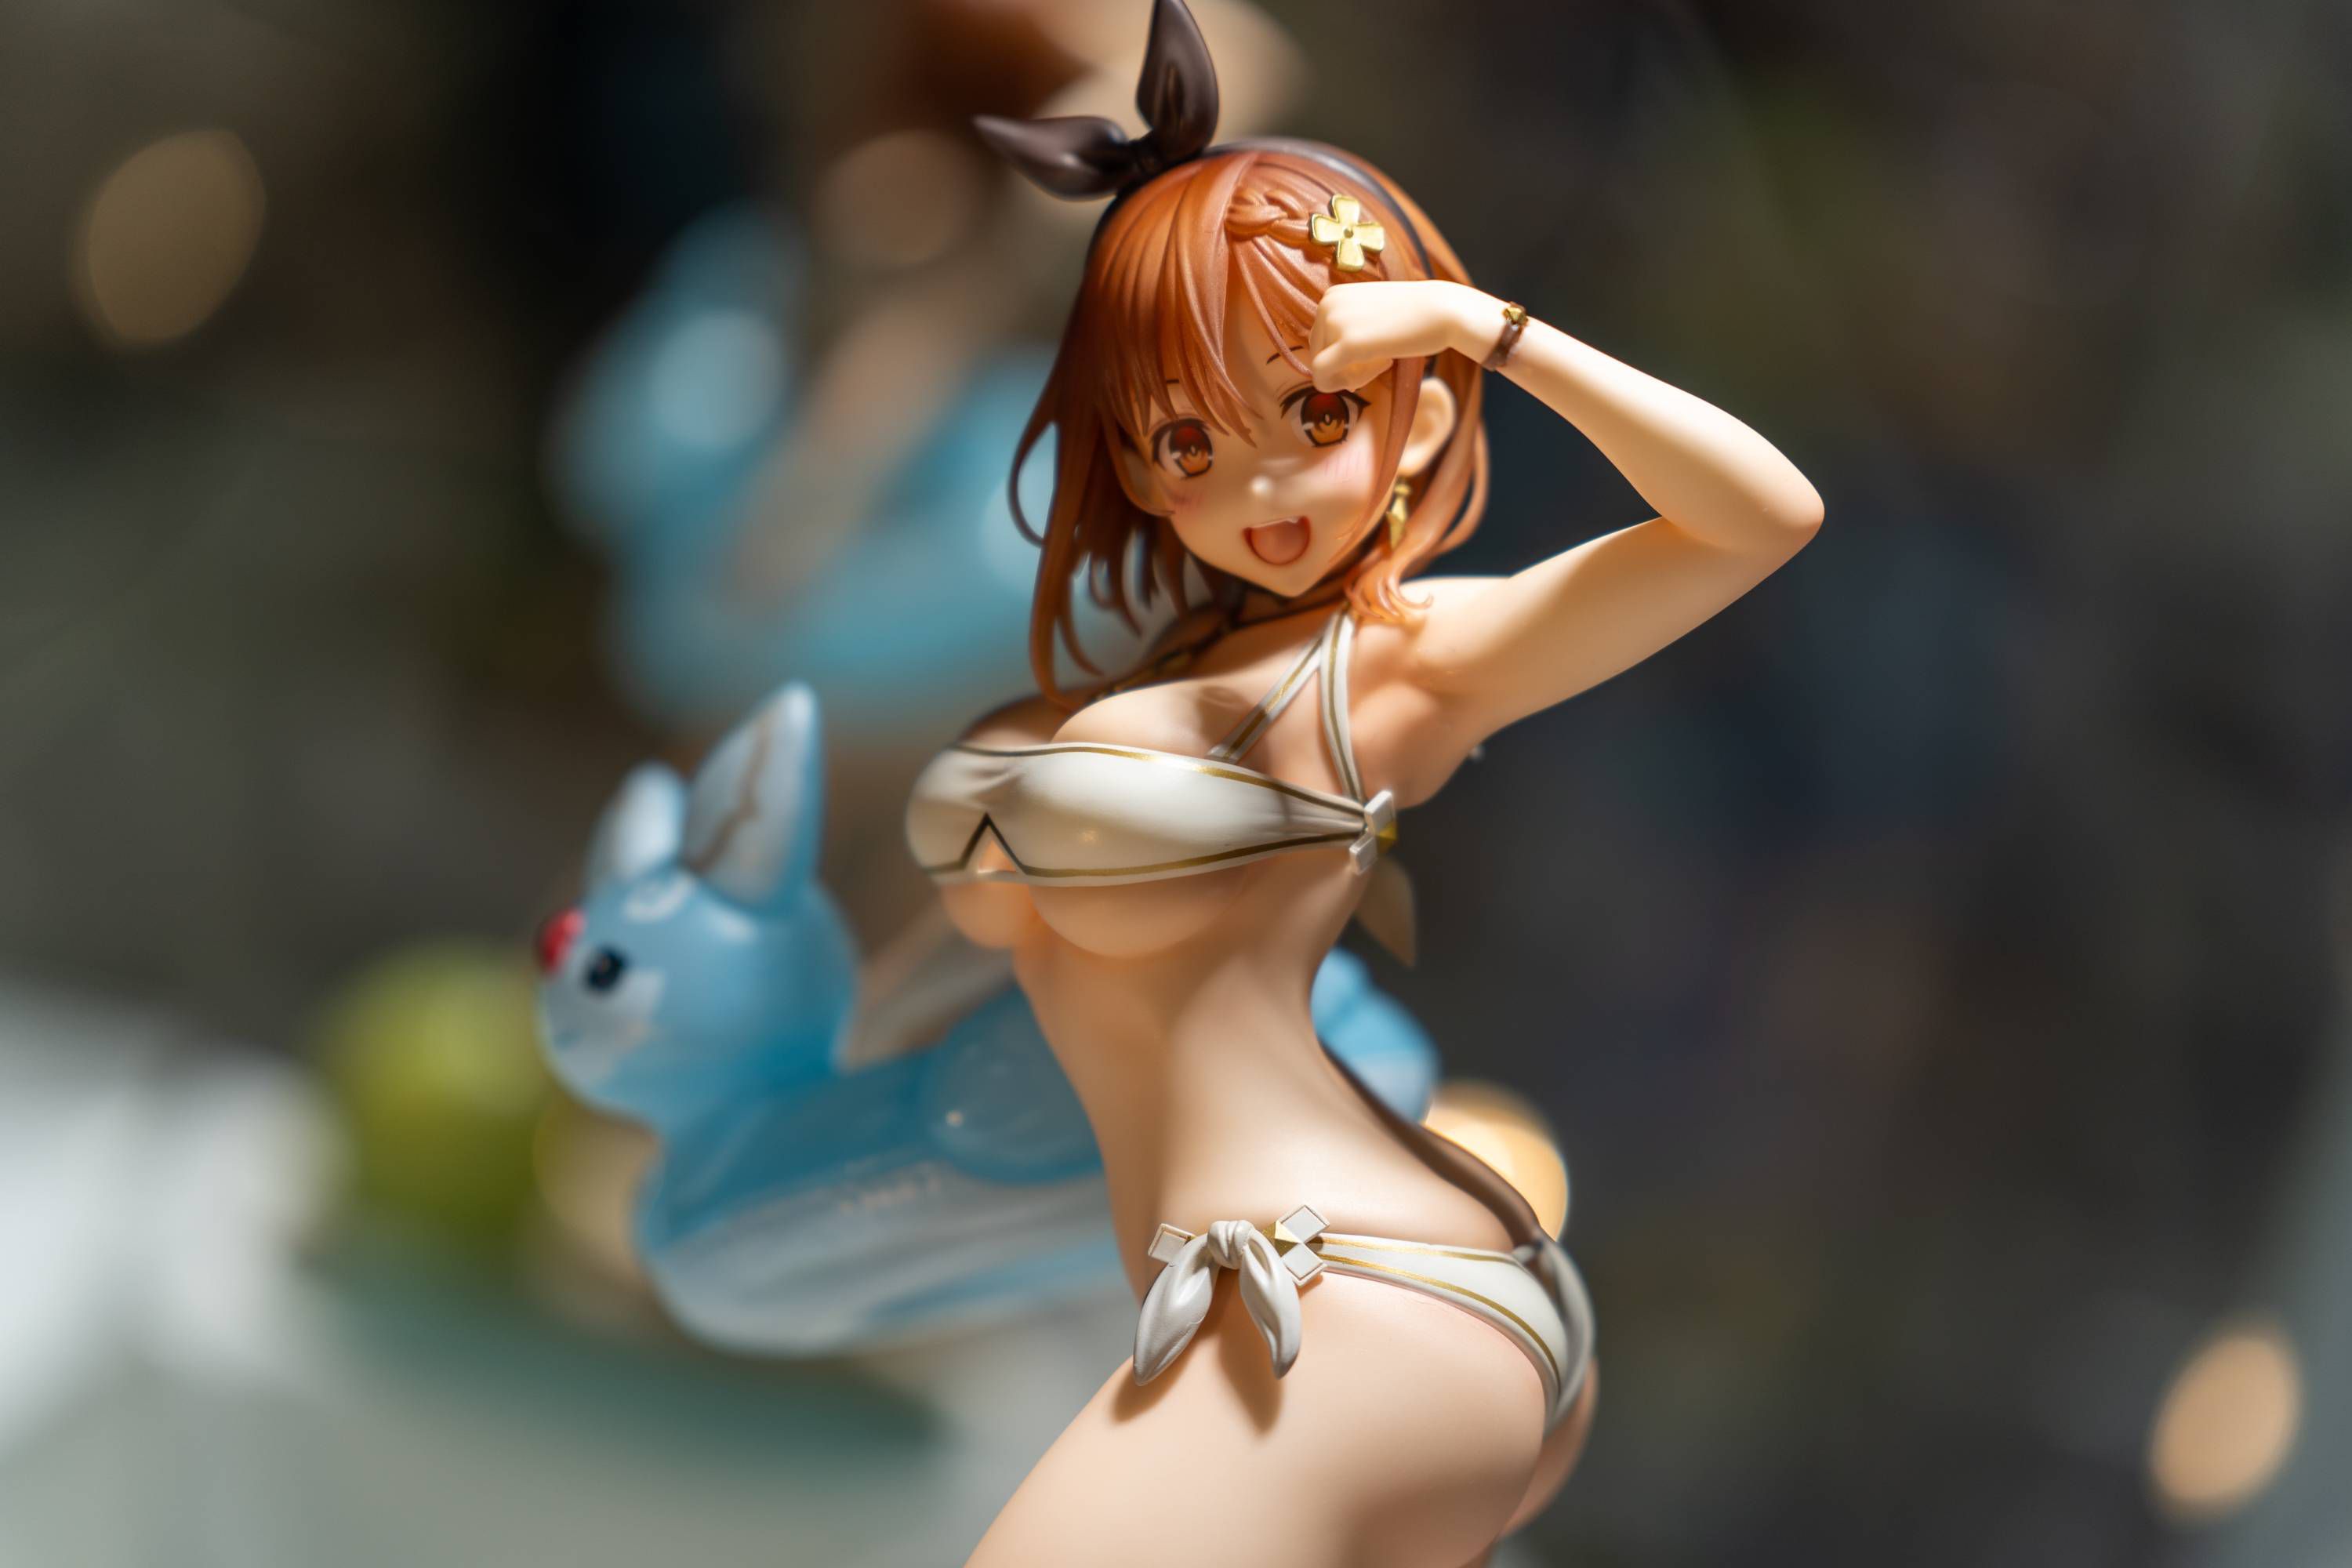 【Image】New figure wwwwwwww too etch called "Change of clothes riser" 4